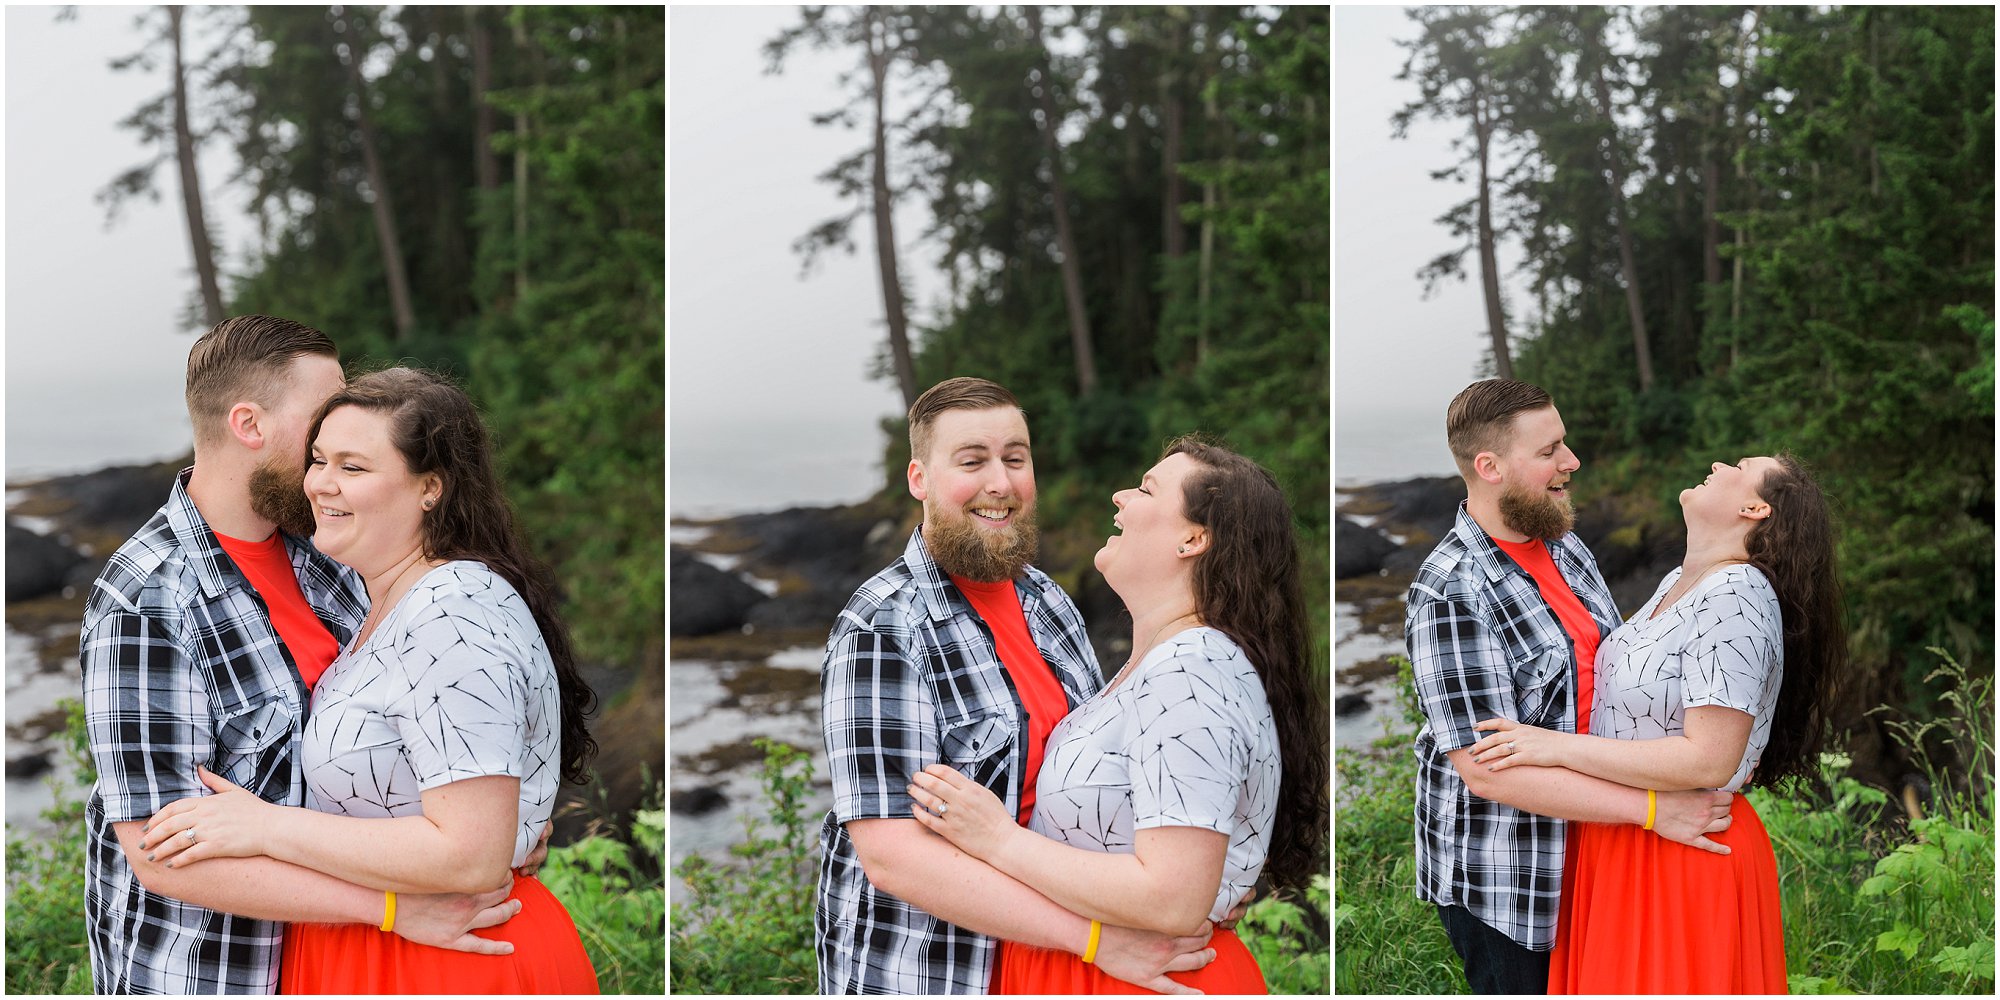 A couple has fun and laughs at their engagement photography session in Port Angeles, WA. | Erica Swantek Photography